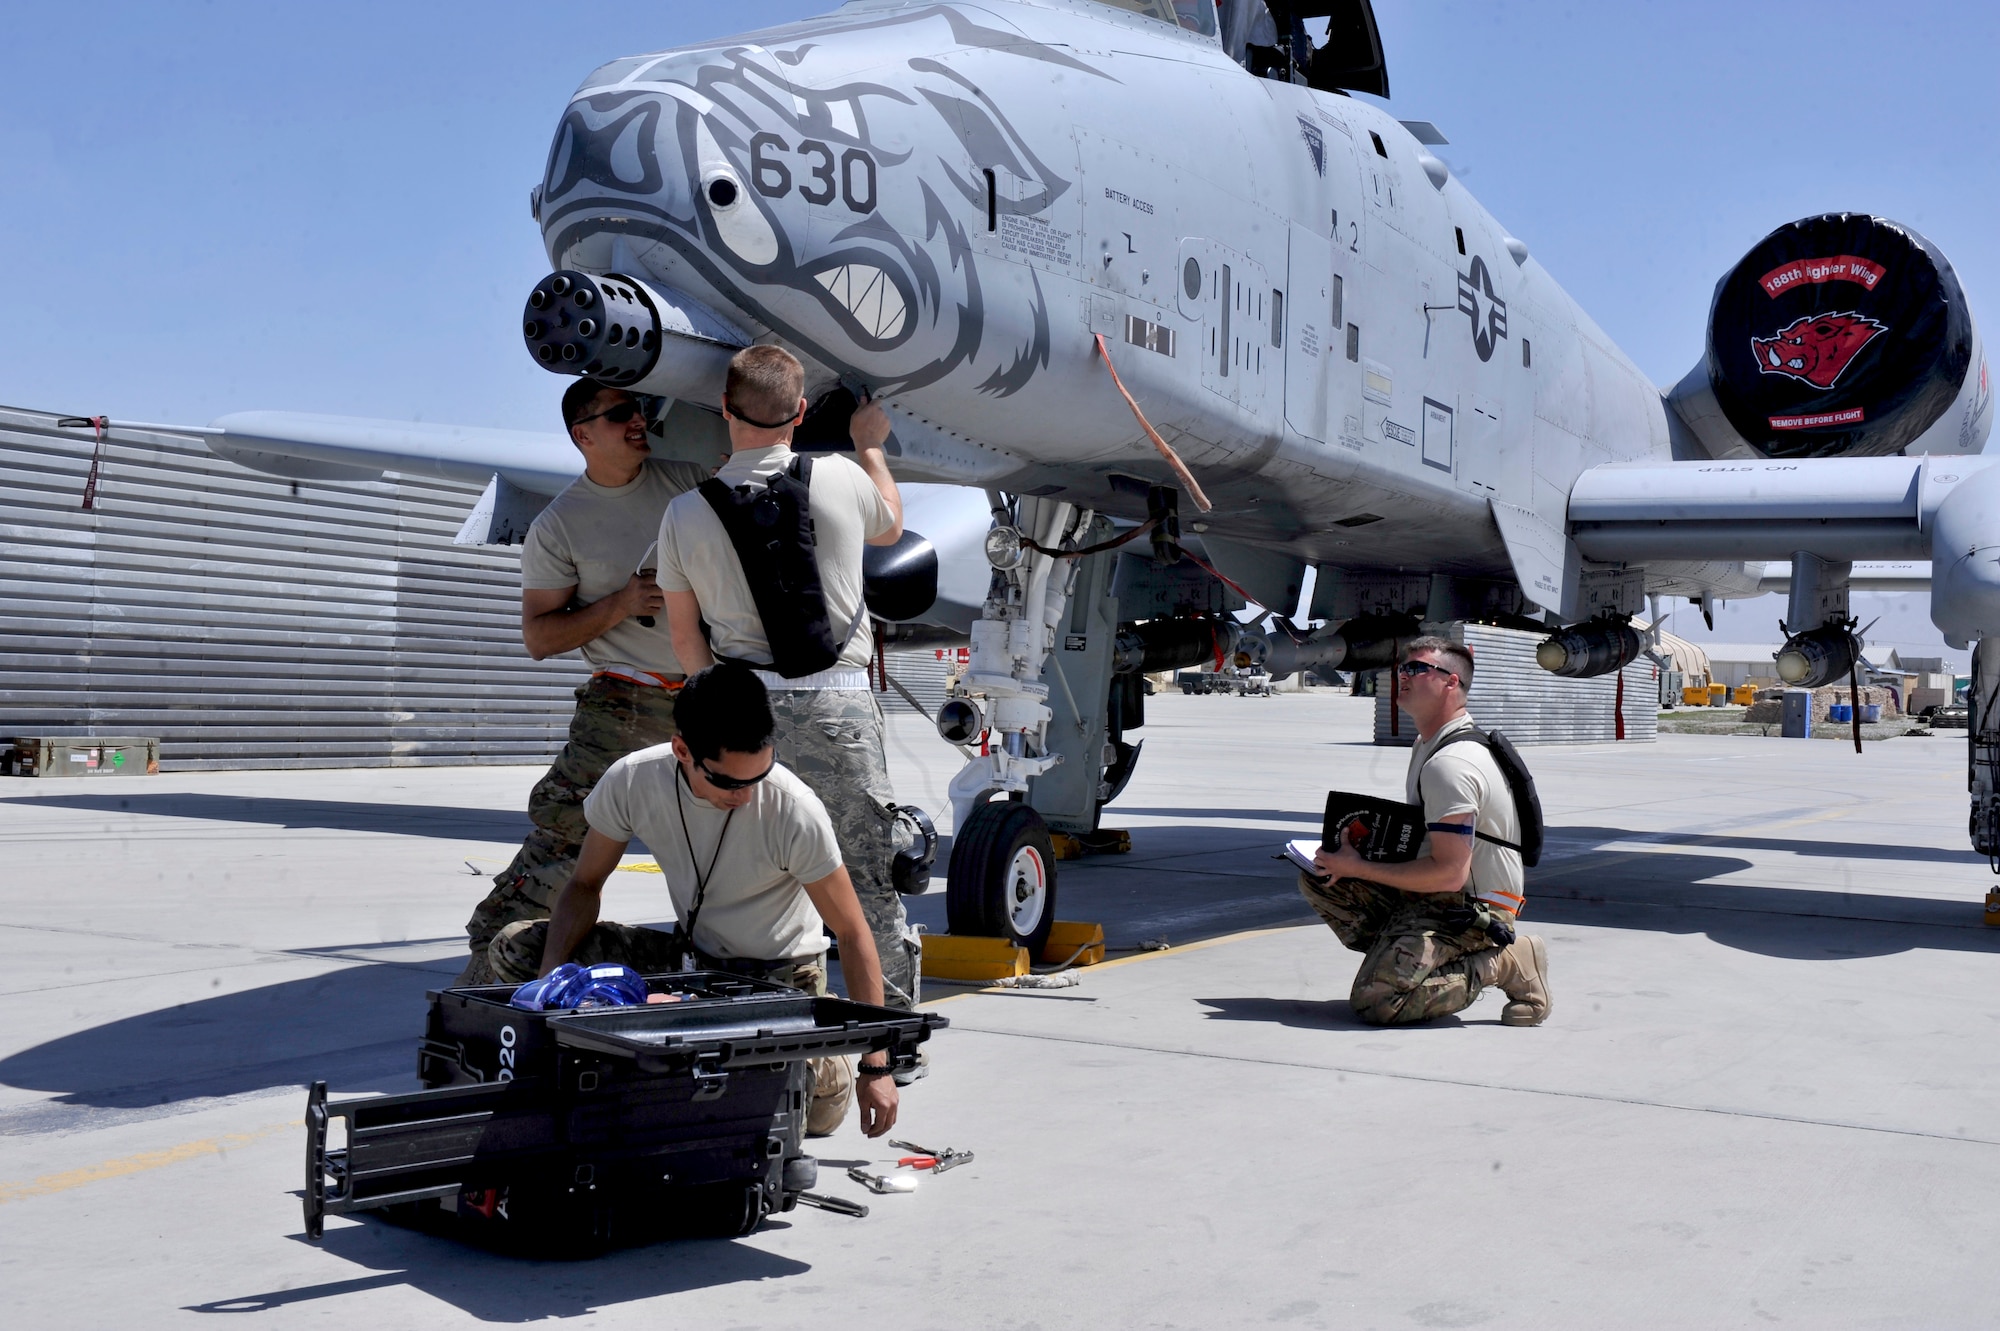 A 455th Expeditionary Aircraft Maintenance Squadron crew works as a team repairing an A-10 Thunderbolt at Bagram Airfield, Afghanistan, April 6, 2012. The 455th EAMXS is responsible for repairing and maintaining military aircraft on Bagram as well as performing preventative maintenance inspections. (U.S. Air Force photo/Airman 1st Class Ericka Engblom)